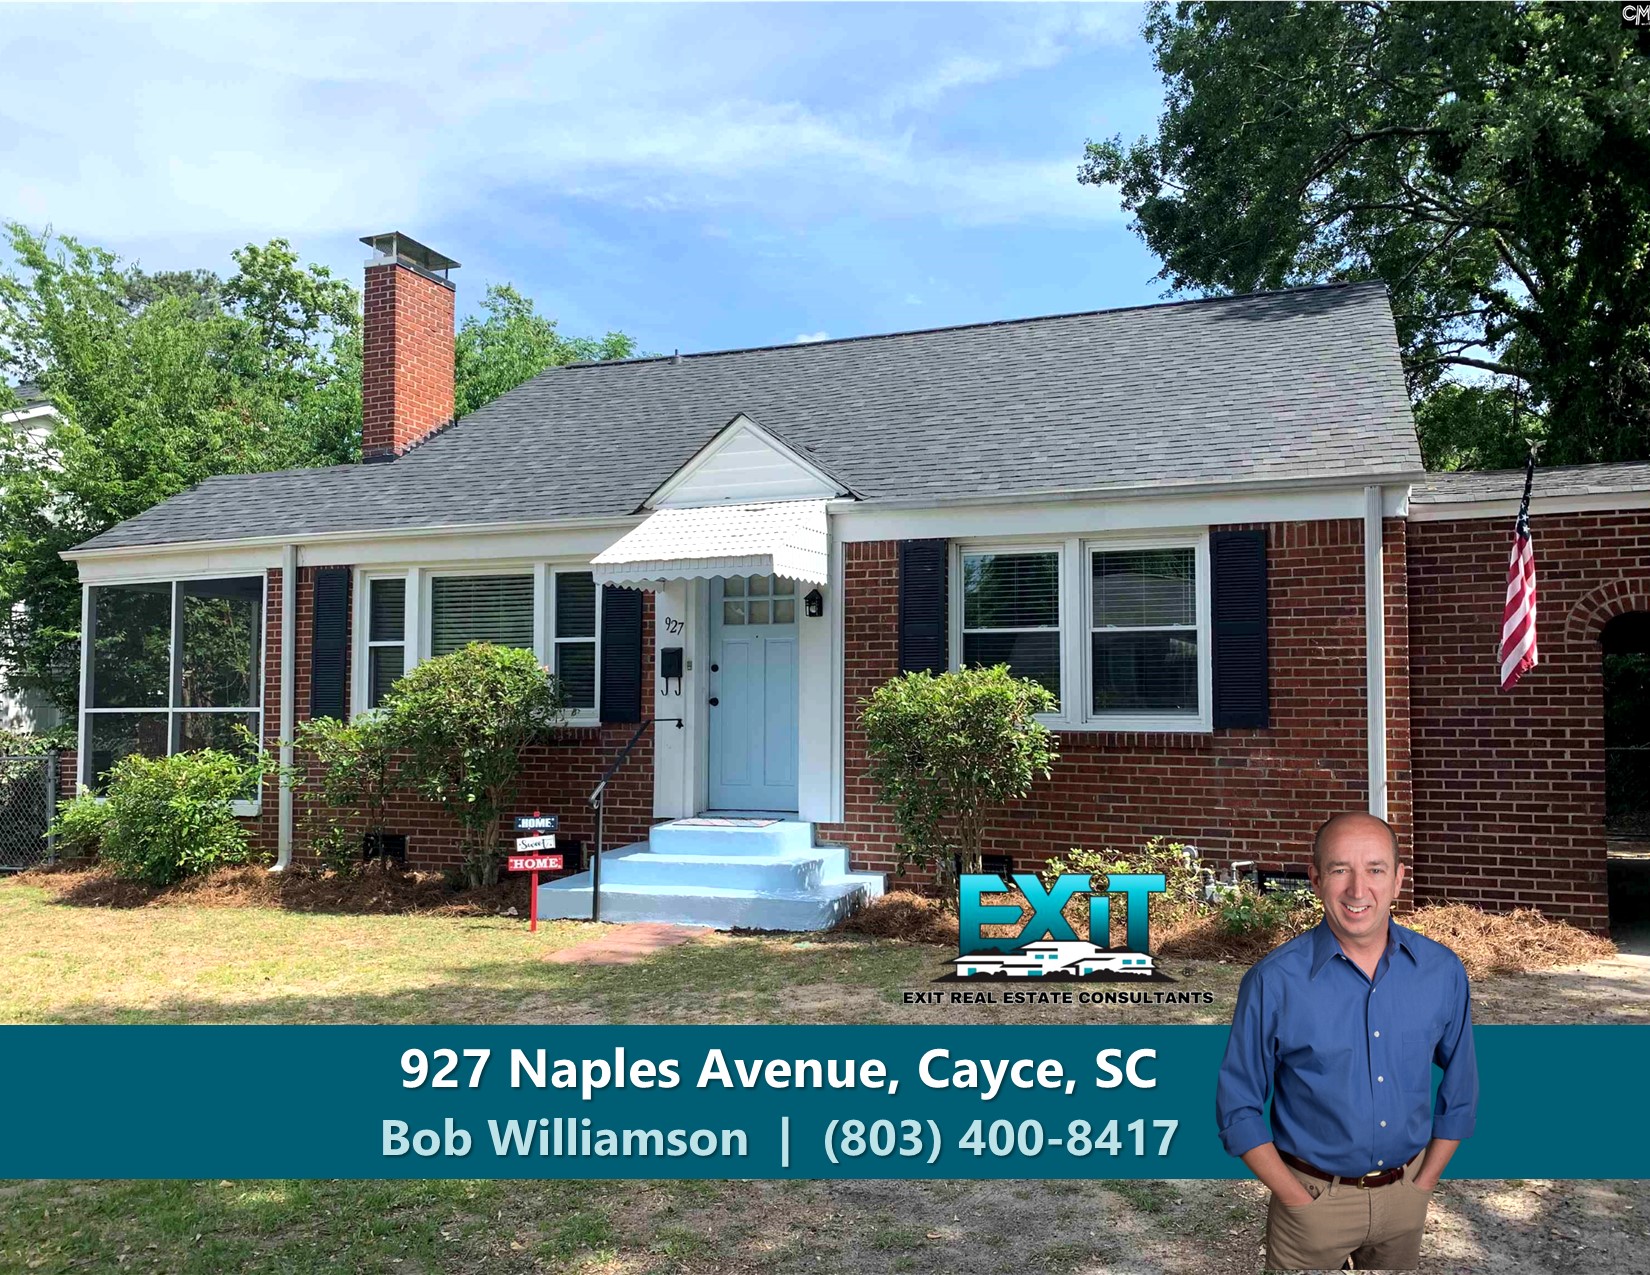 Just listed in The Avenues - Cayce